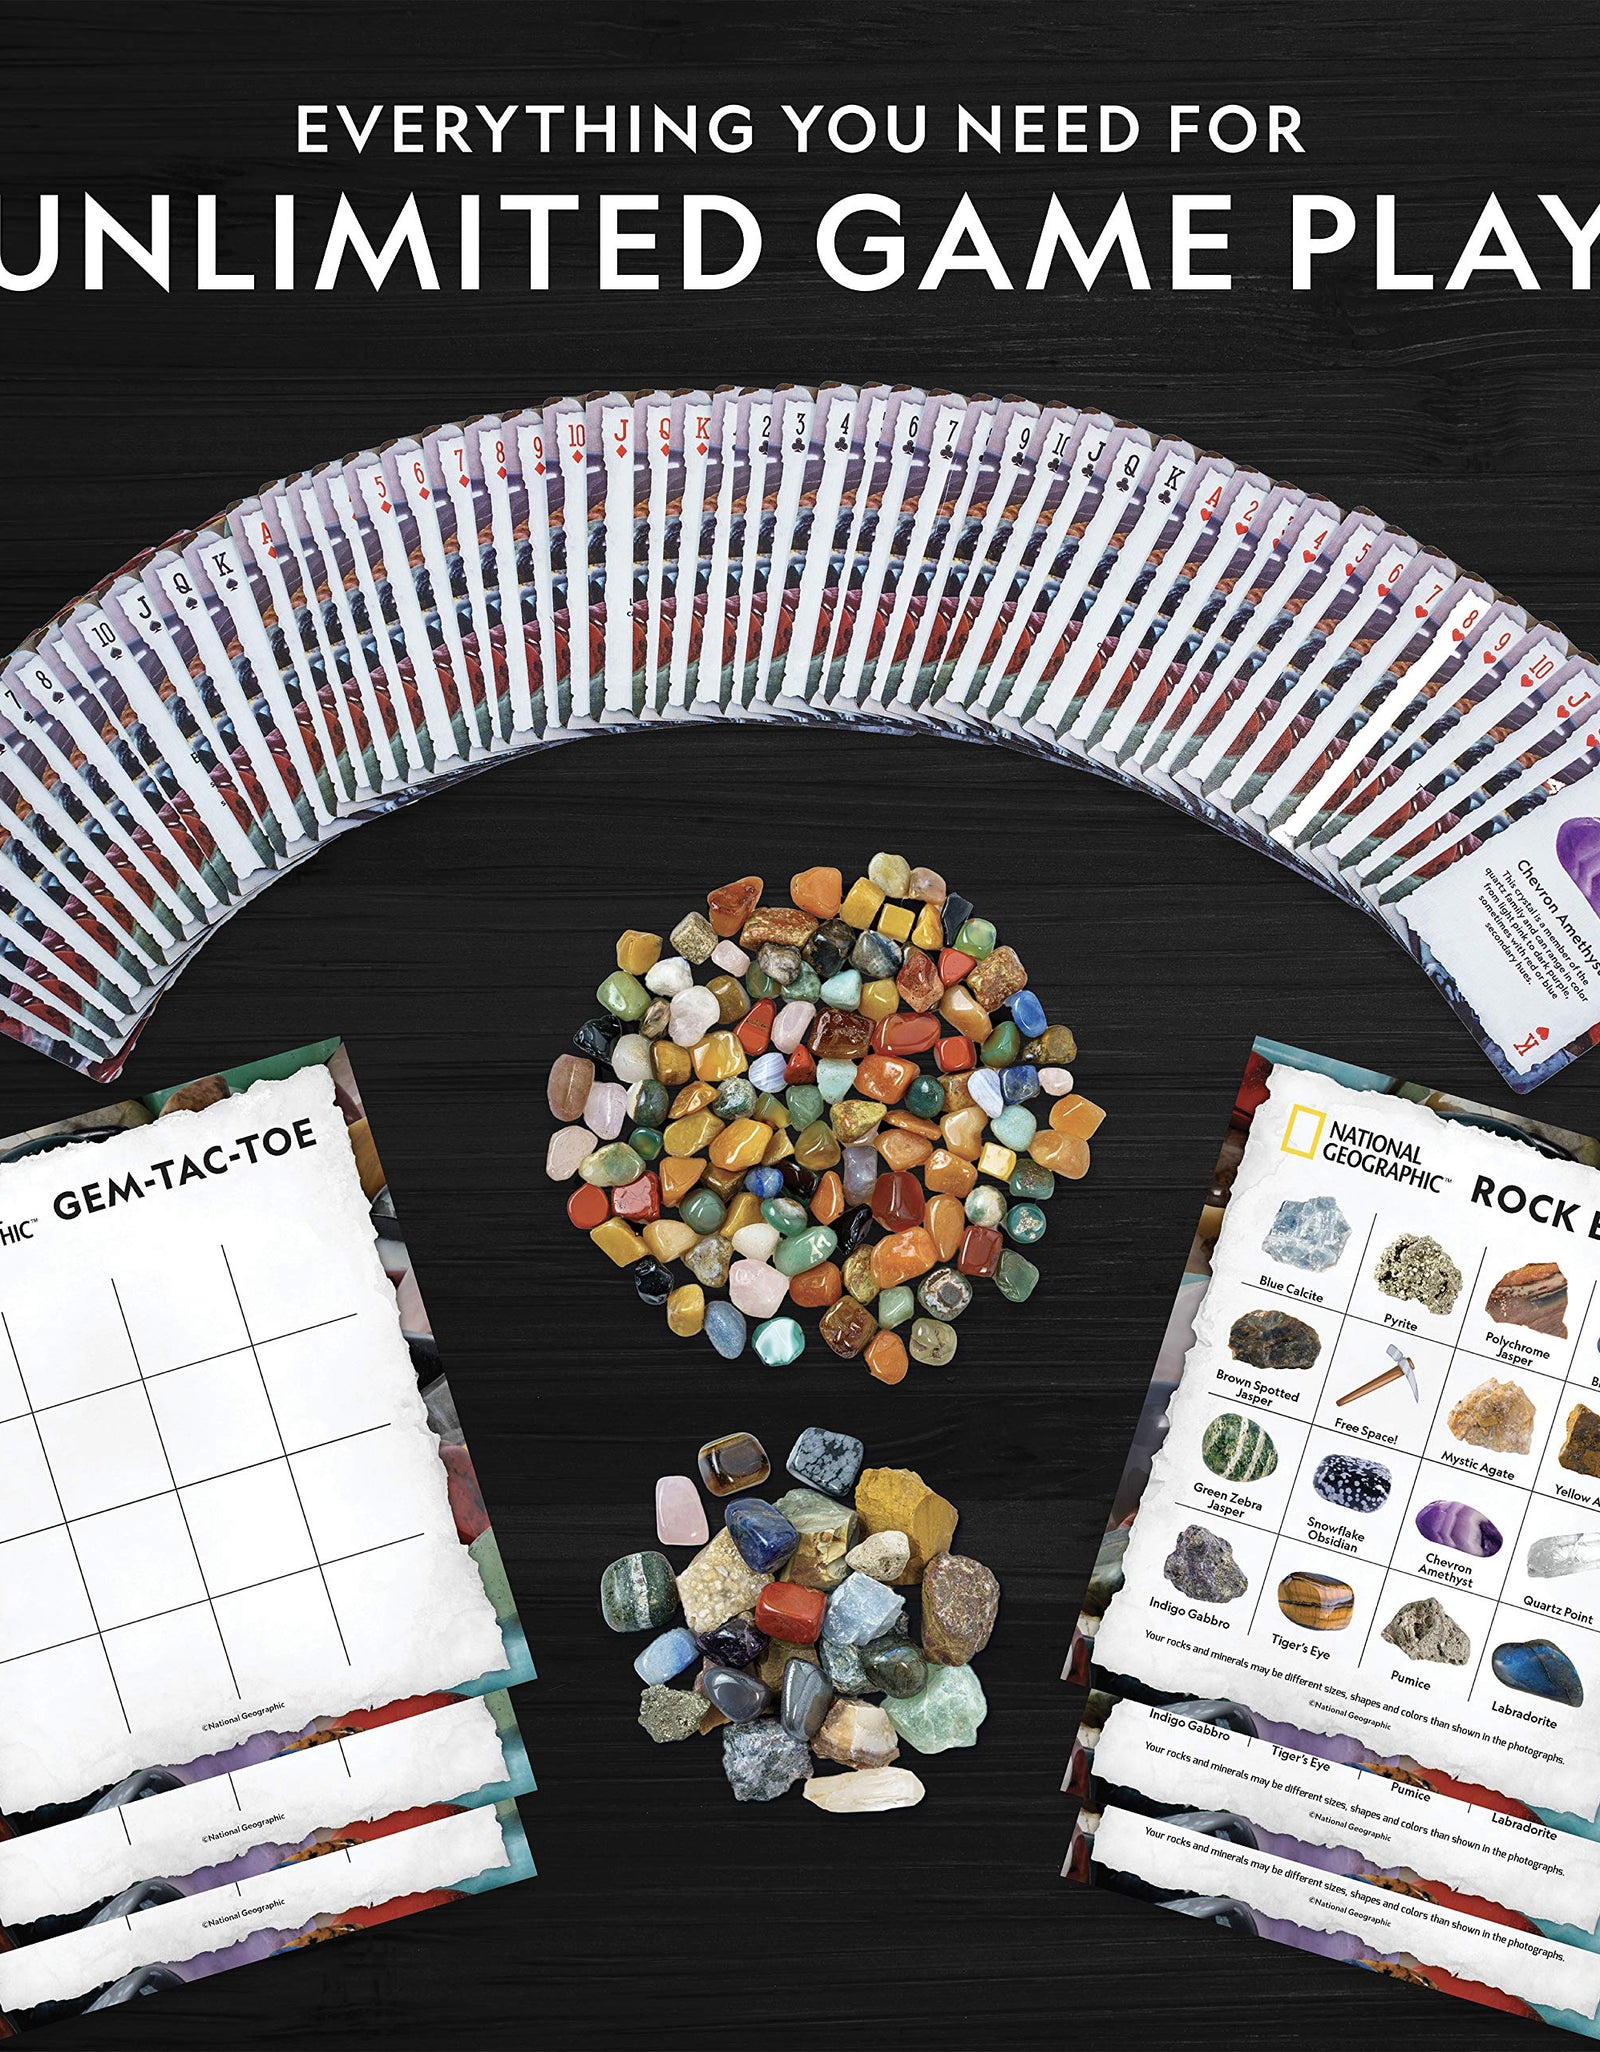 NATIONAL GEOGRAPHIC Rock Bingo Game -Play Rock Bingo, Mineral Memory, Gemstone Trivia, & Your Favorite Card Games, Collection Includes Over 150 Rocks and Minerals, Great Educational STEM Toys for Kids